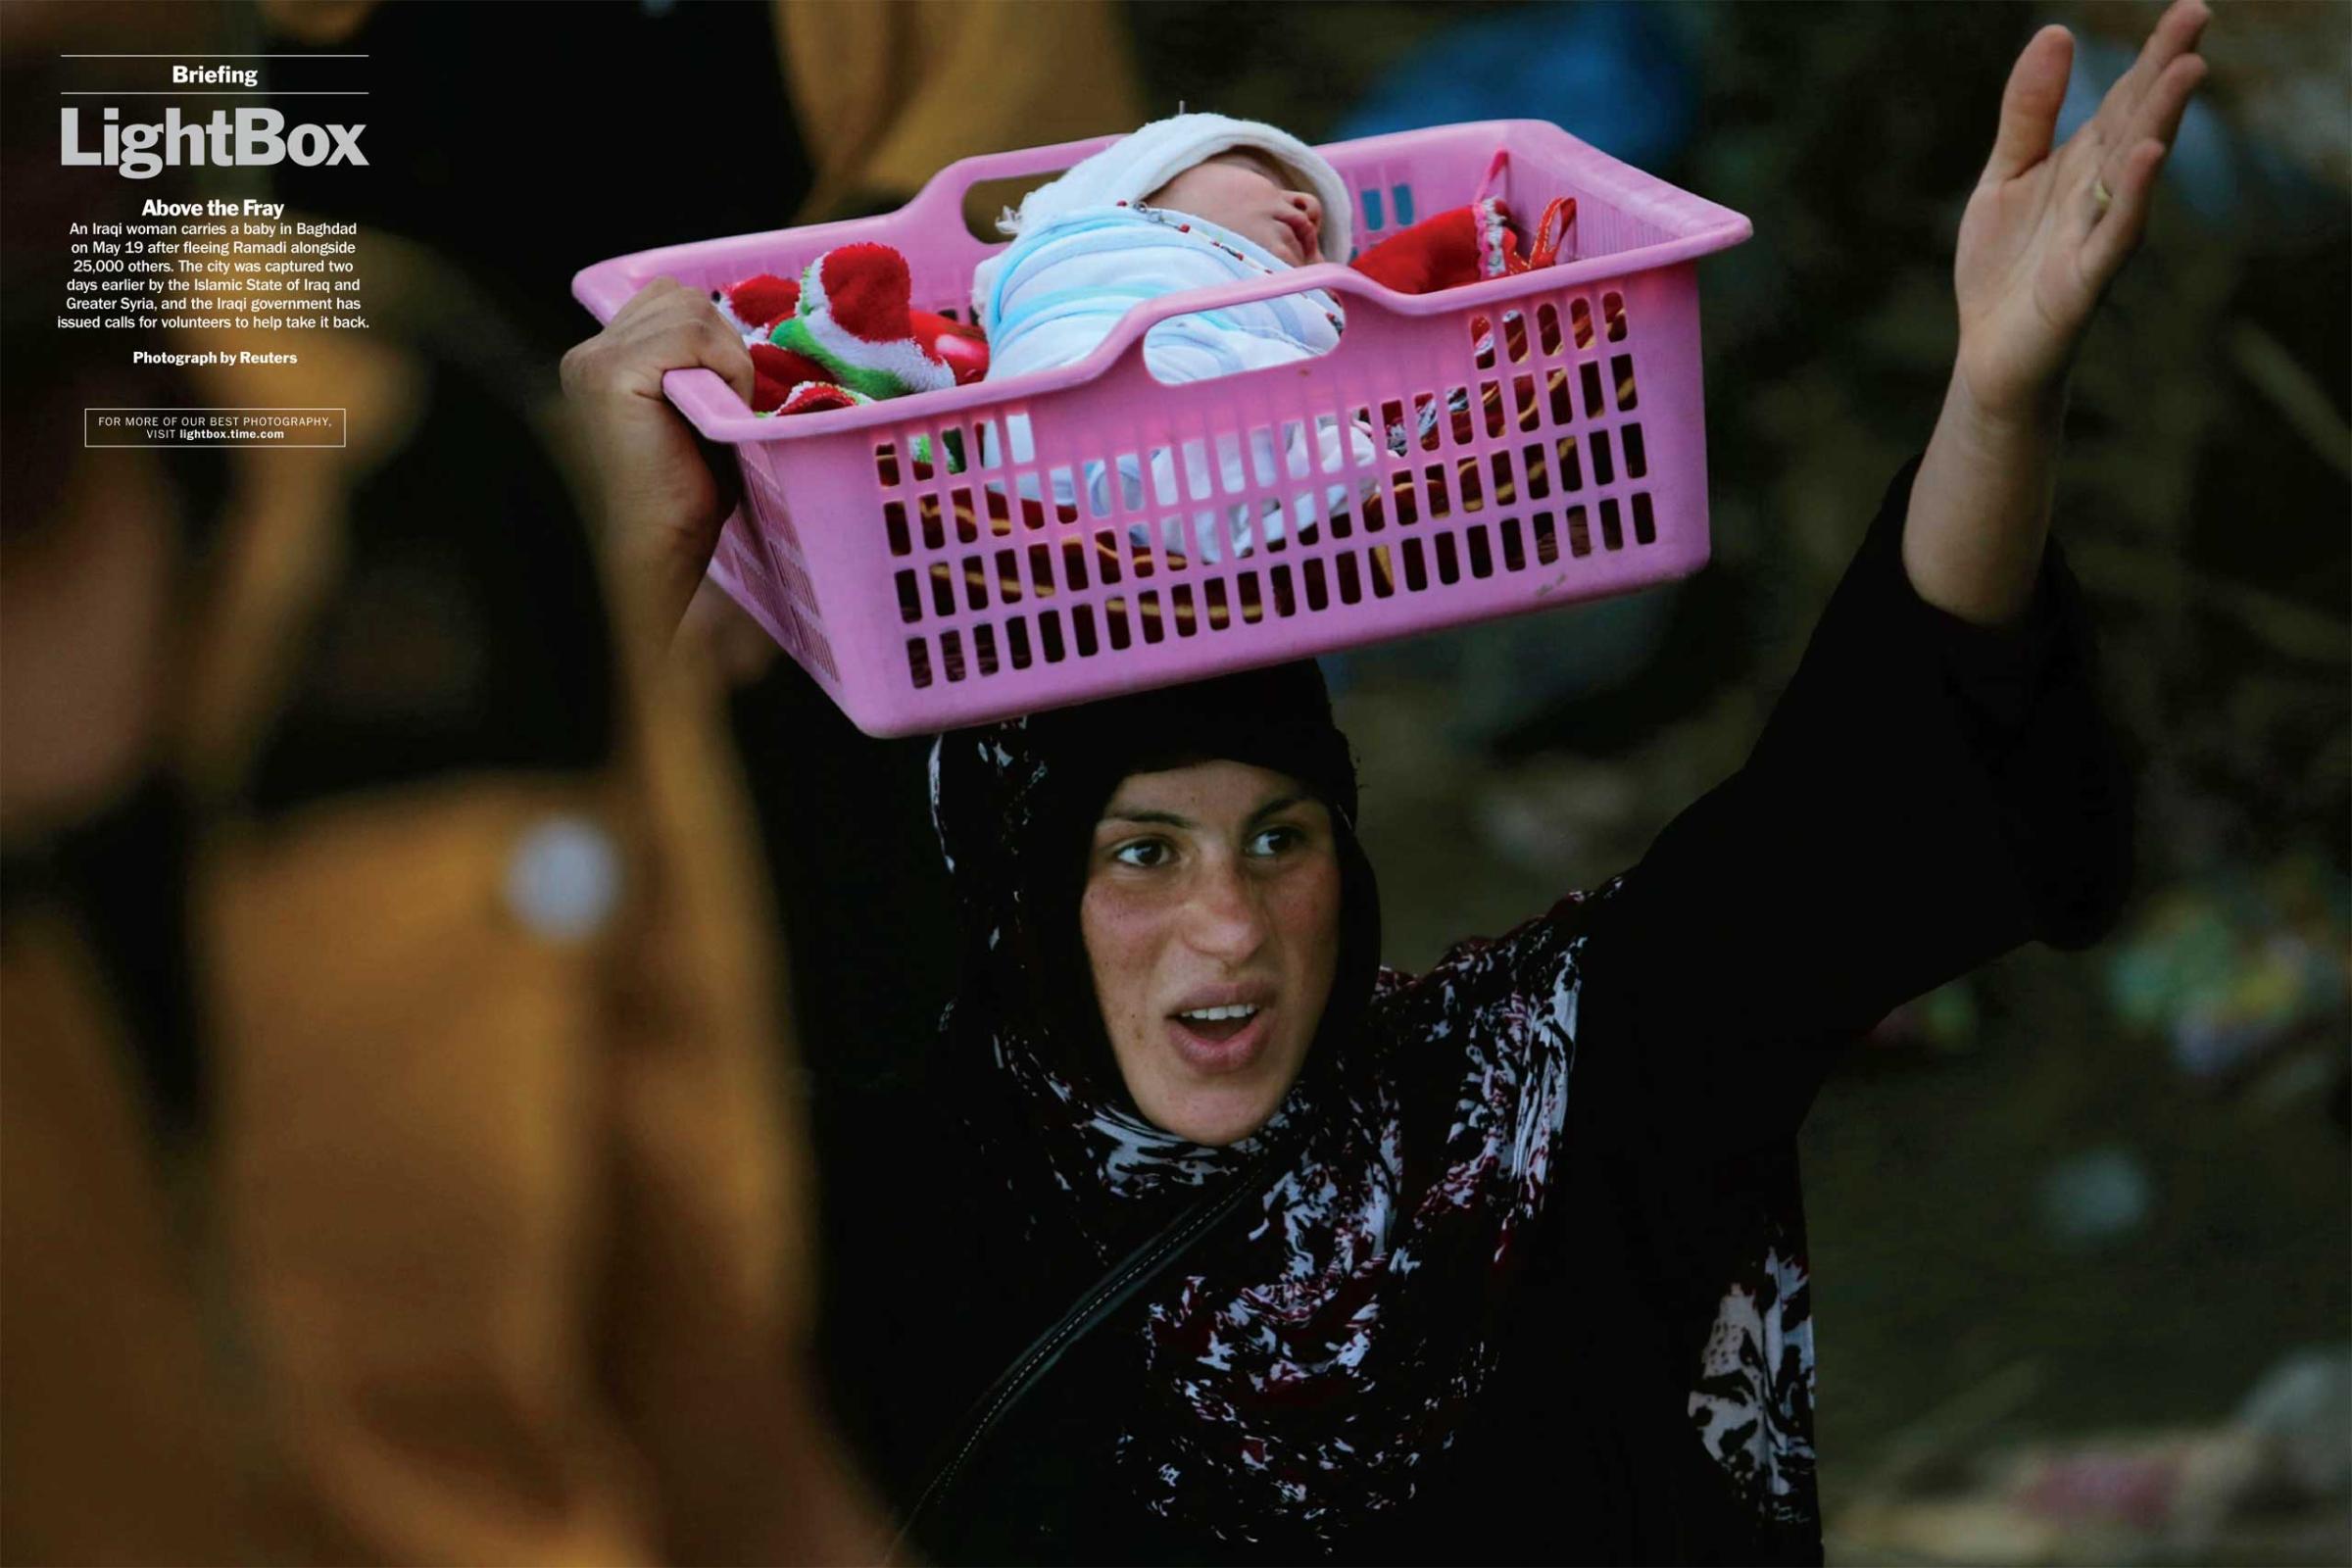 Photograph by ReutersAn Iraqi woman carries a baby in Baghdad on May 19 after fleeing Ramadi alongside 25,000 others. The city was captured two days earlier by the Islamic State of Iraq and Greater Syria, and the Iraqi government has issued calls for volunteers to help take it back. (TIME issue June 1, 2015)